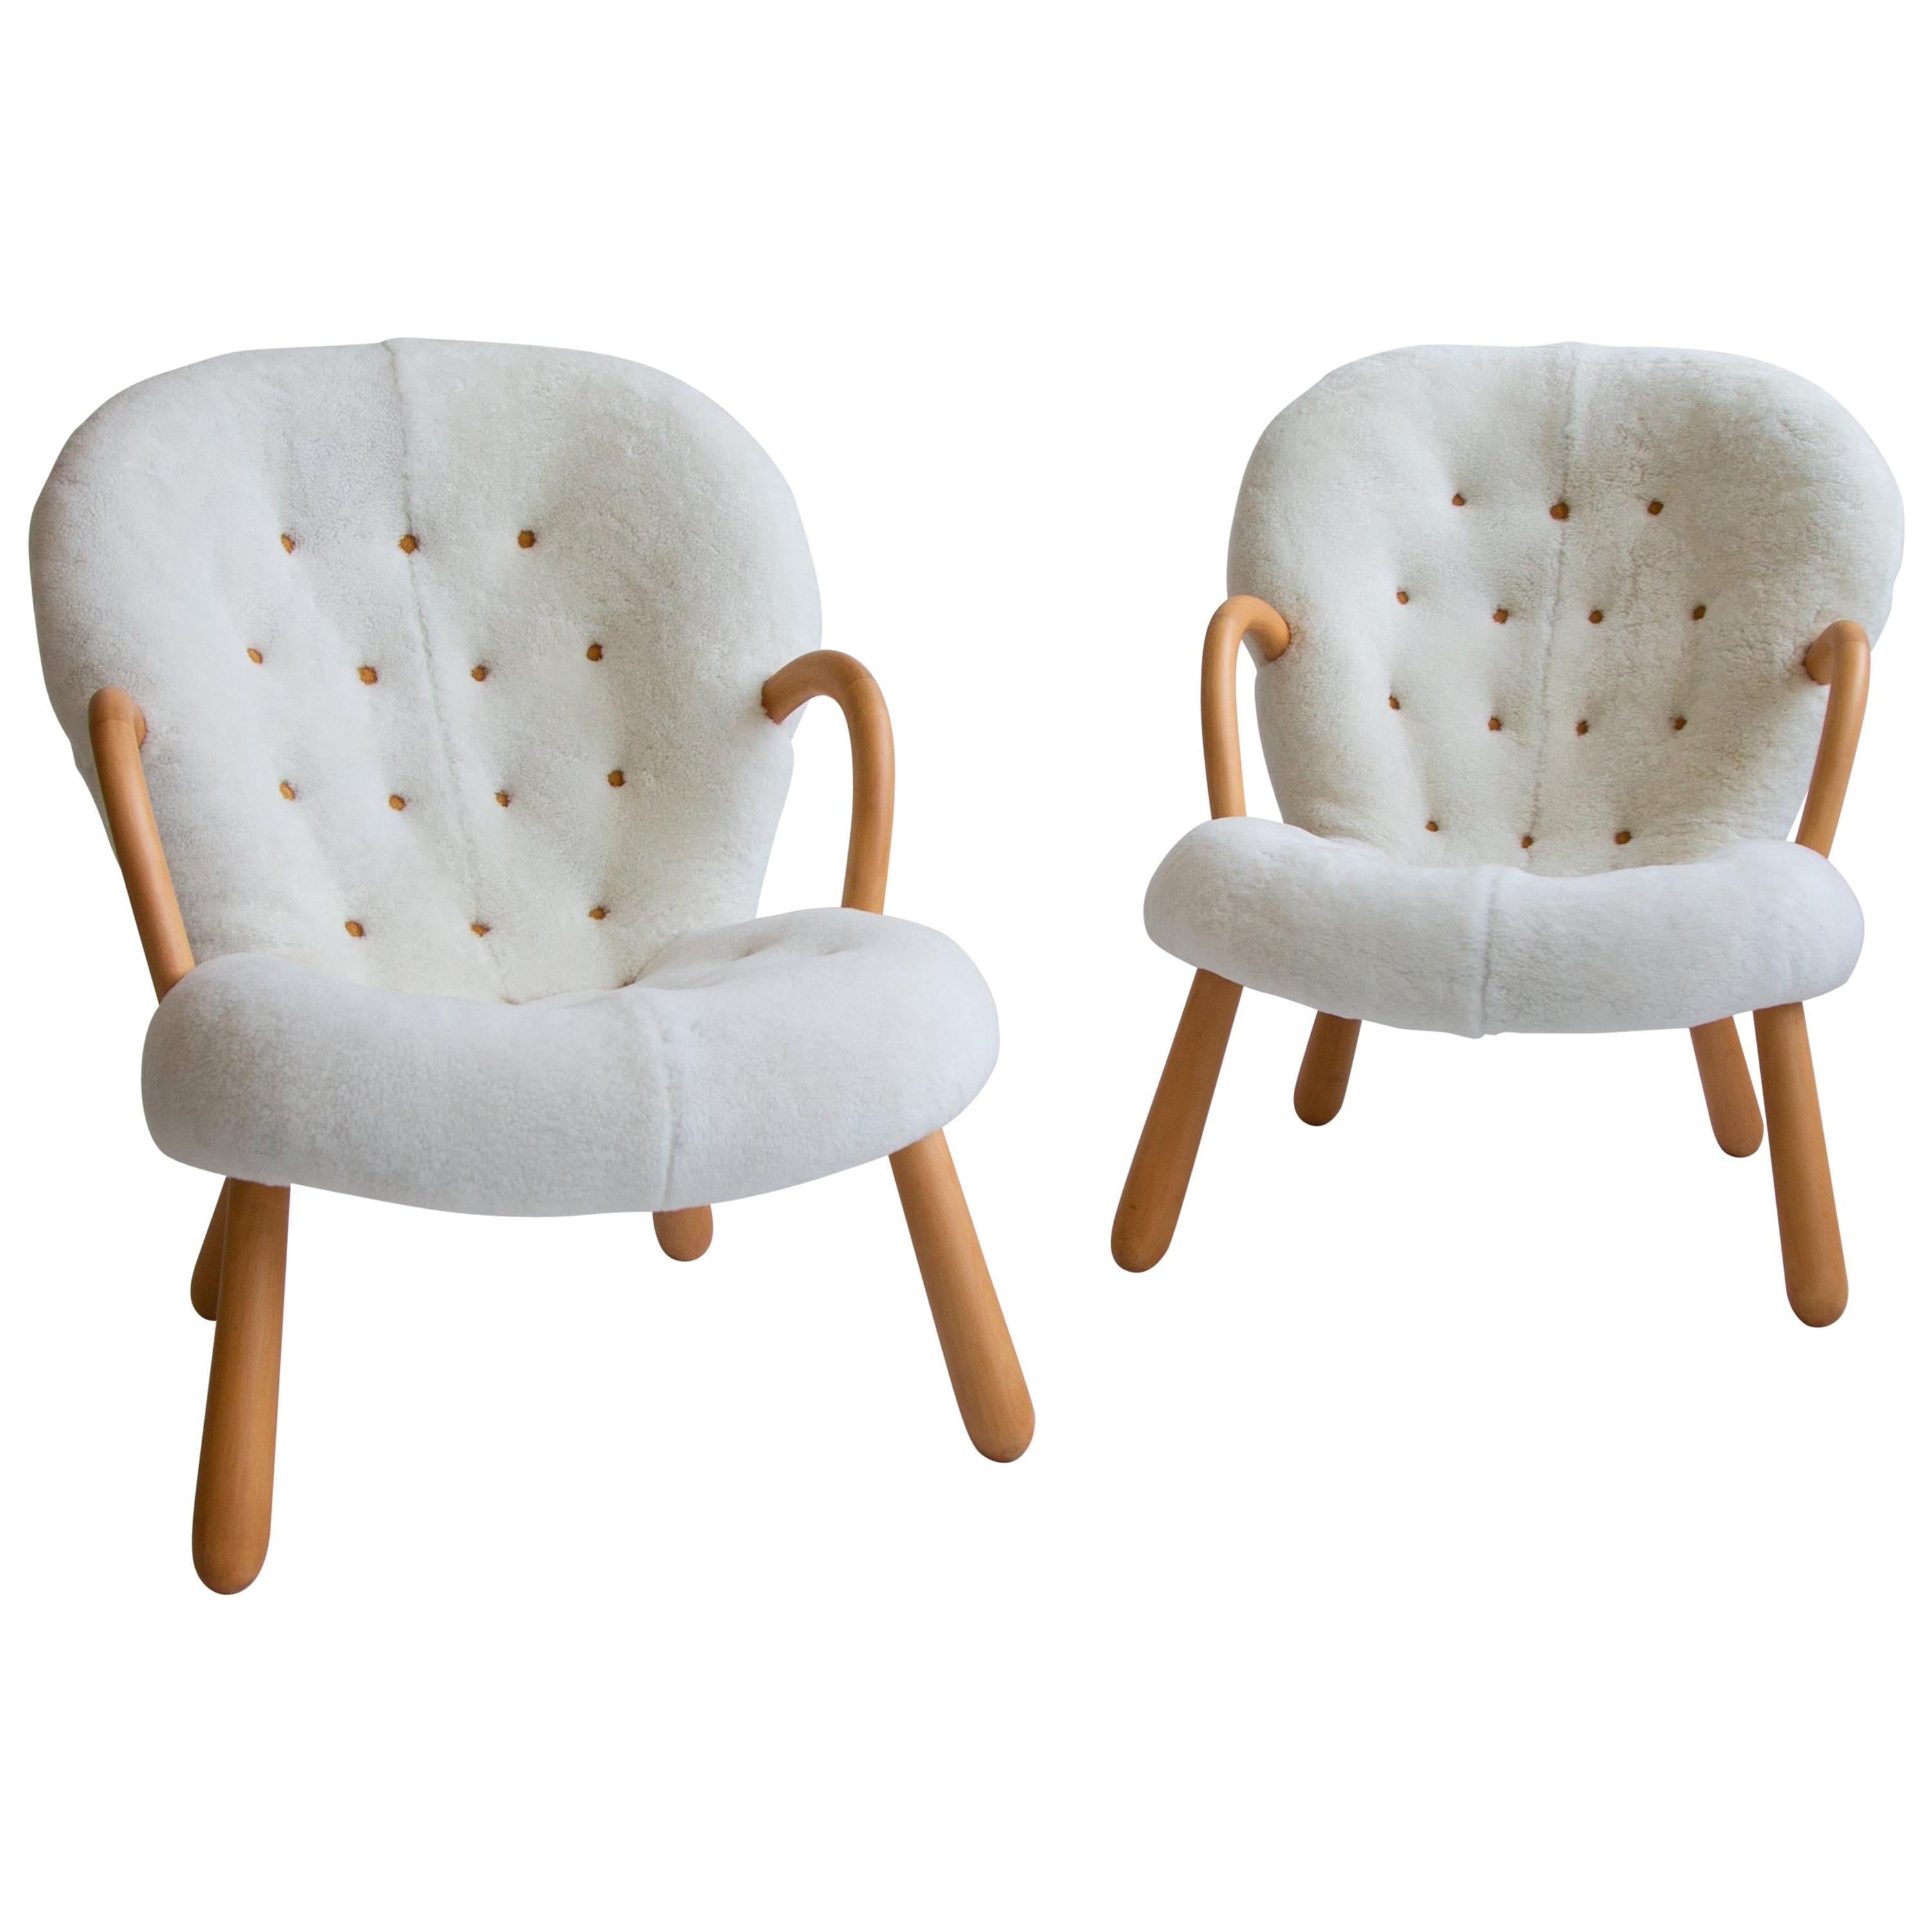 Pair of Philip Arctander Clam Chairs in Shearling, Mid-Century, Scandinavian